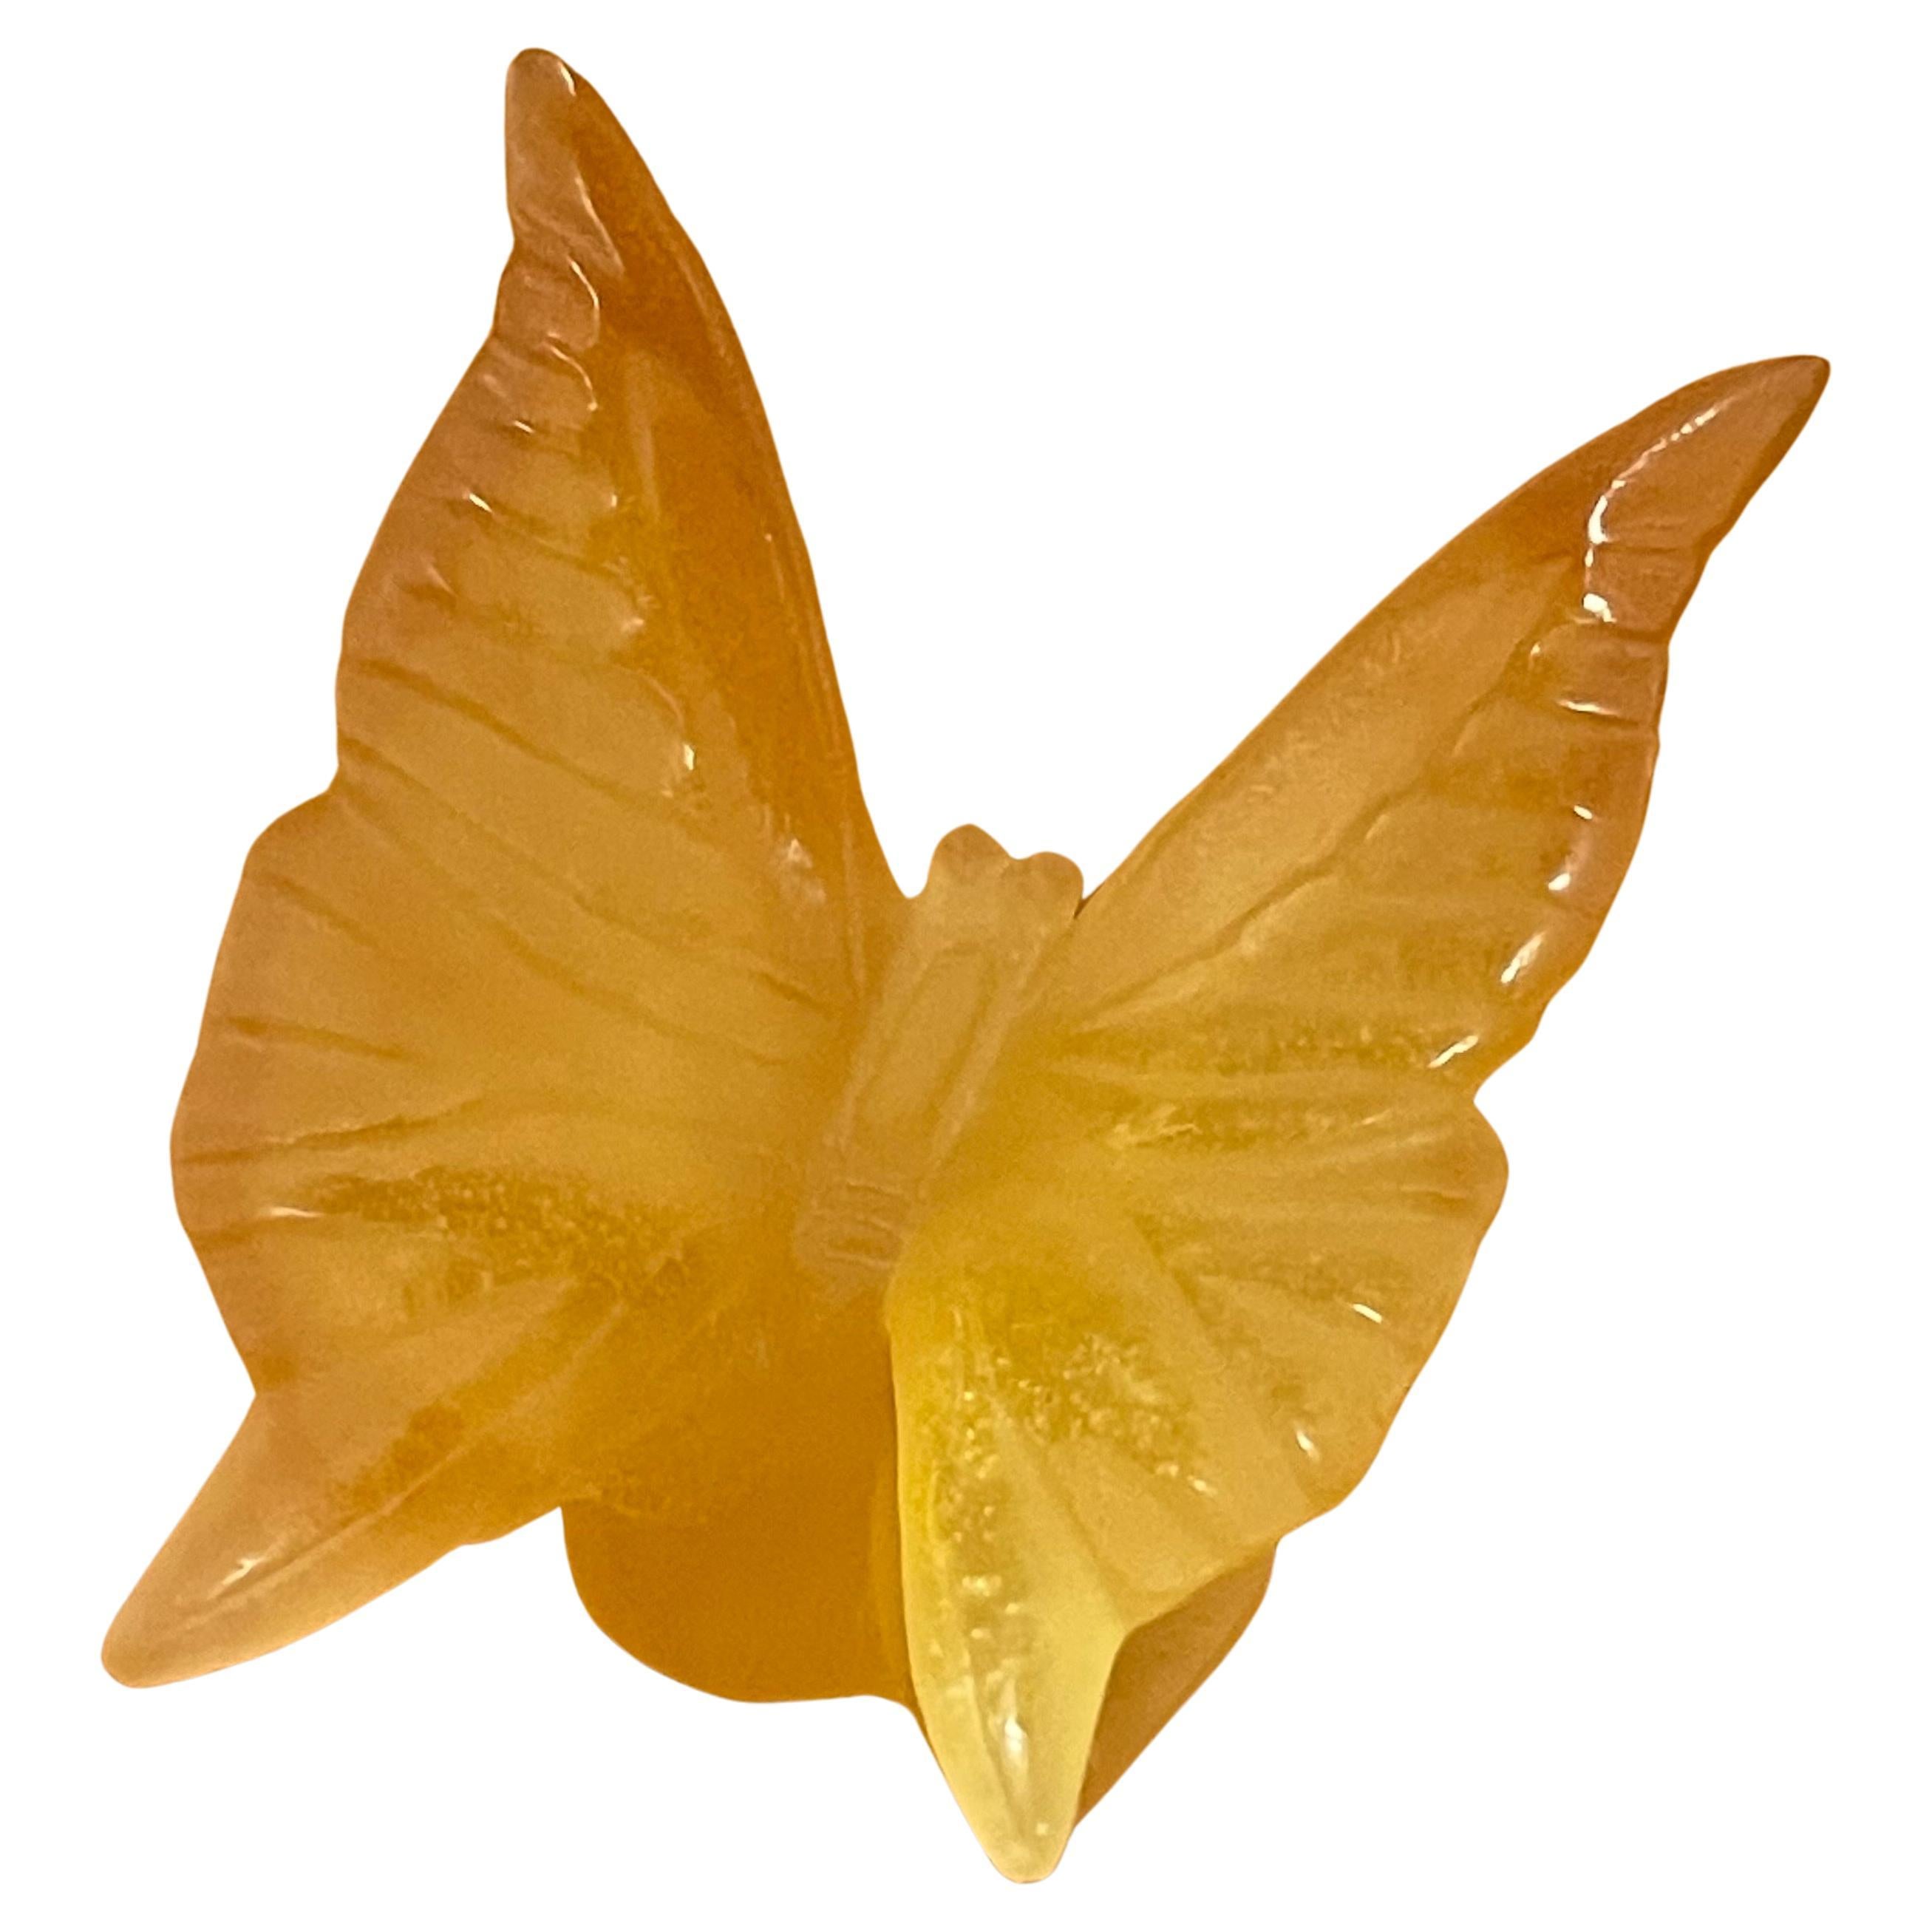 Small Crystal Butterfly Sculpture / Paperweight by Daum, France